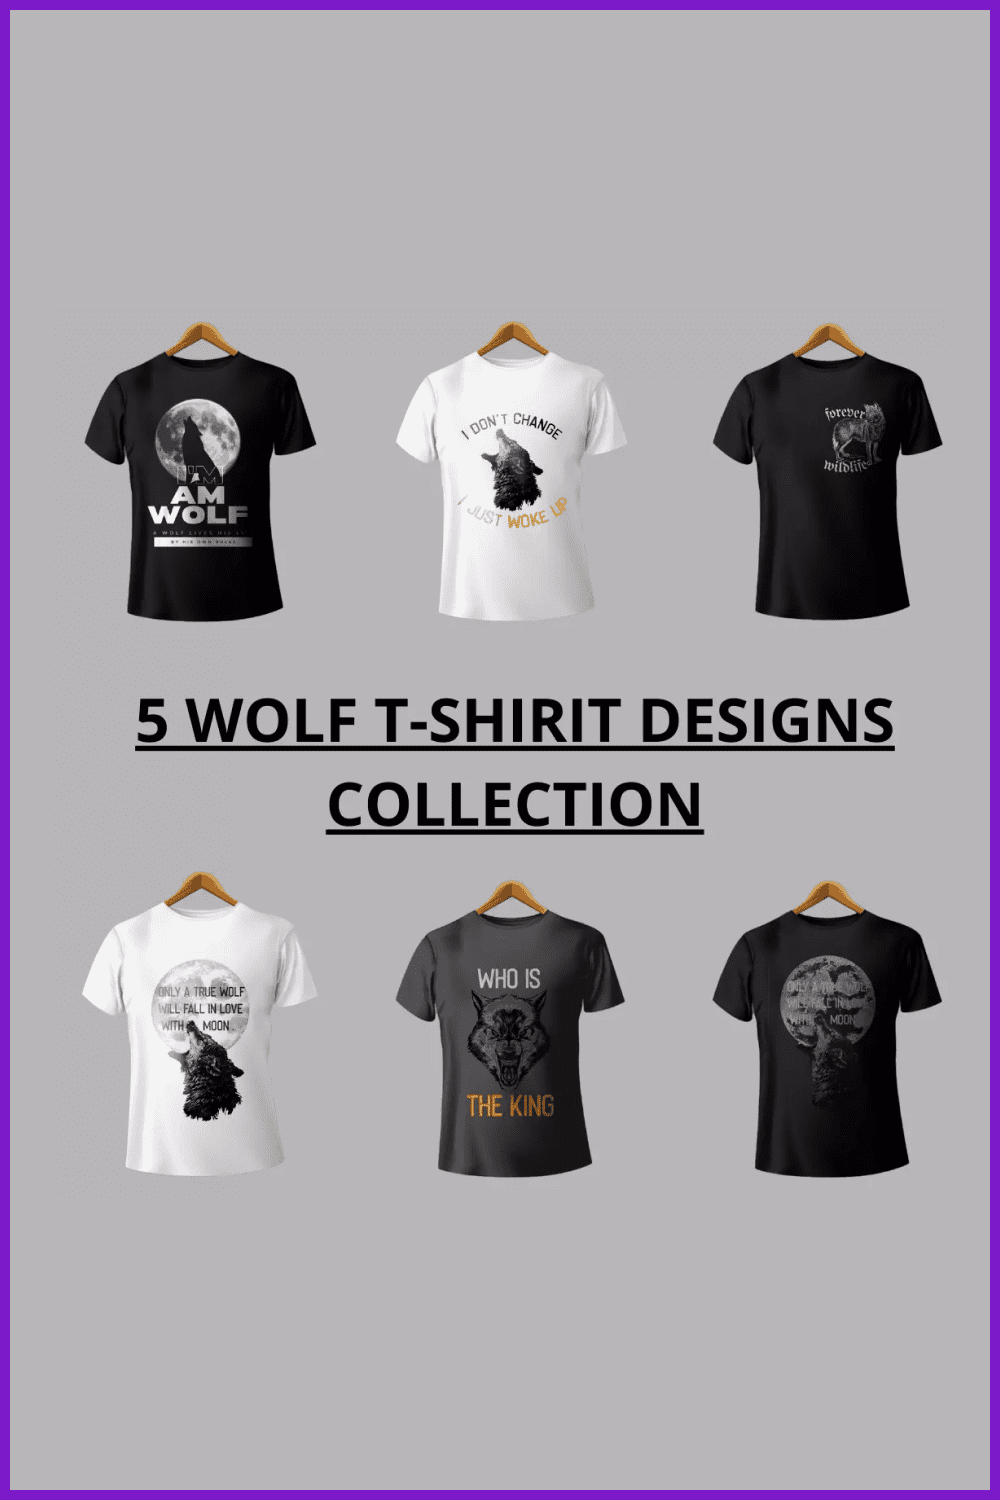 6 T-shirts in white, gray and black with wolf designs.